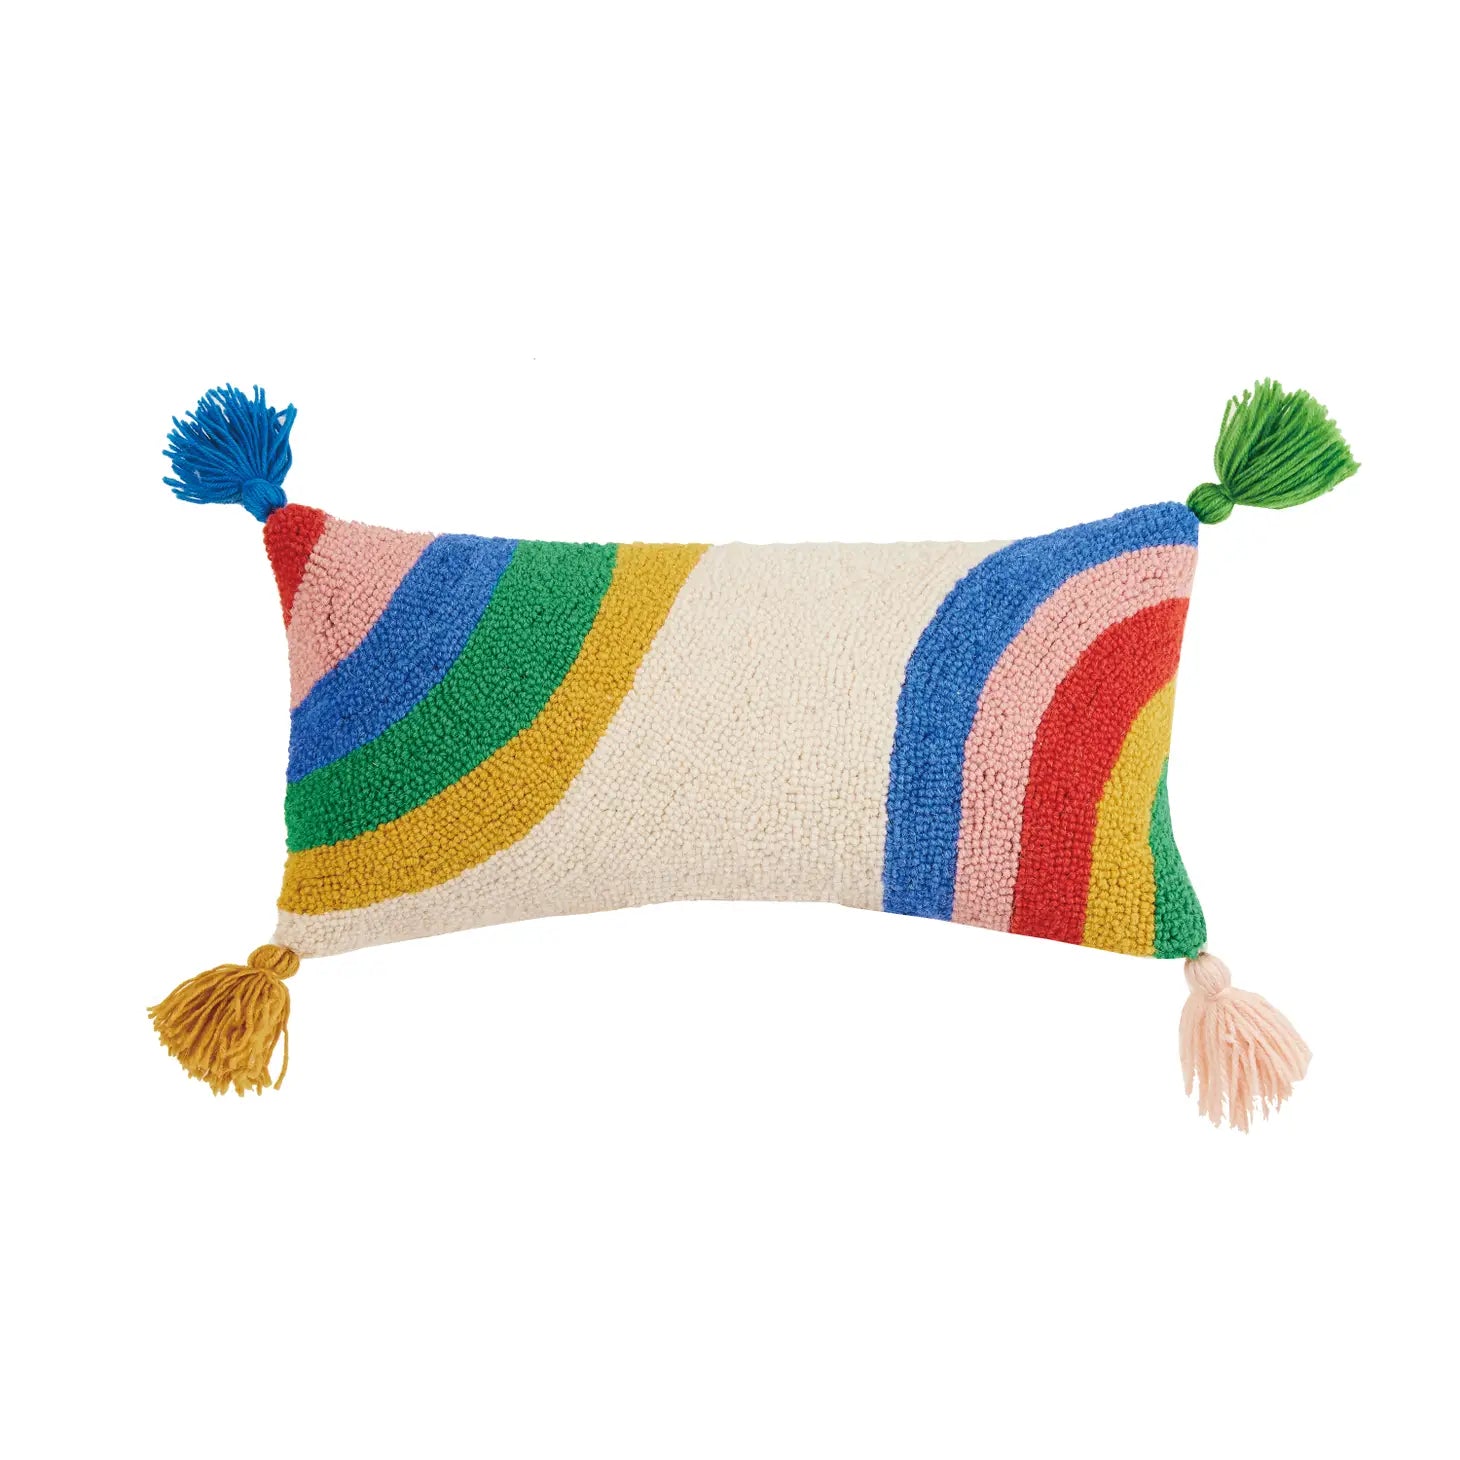 Rainbow with Tassels Wool Hooked Pillow Designed by Ampersand